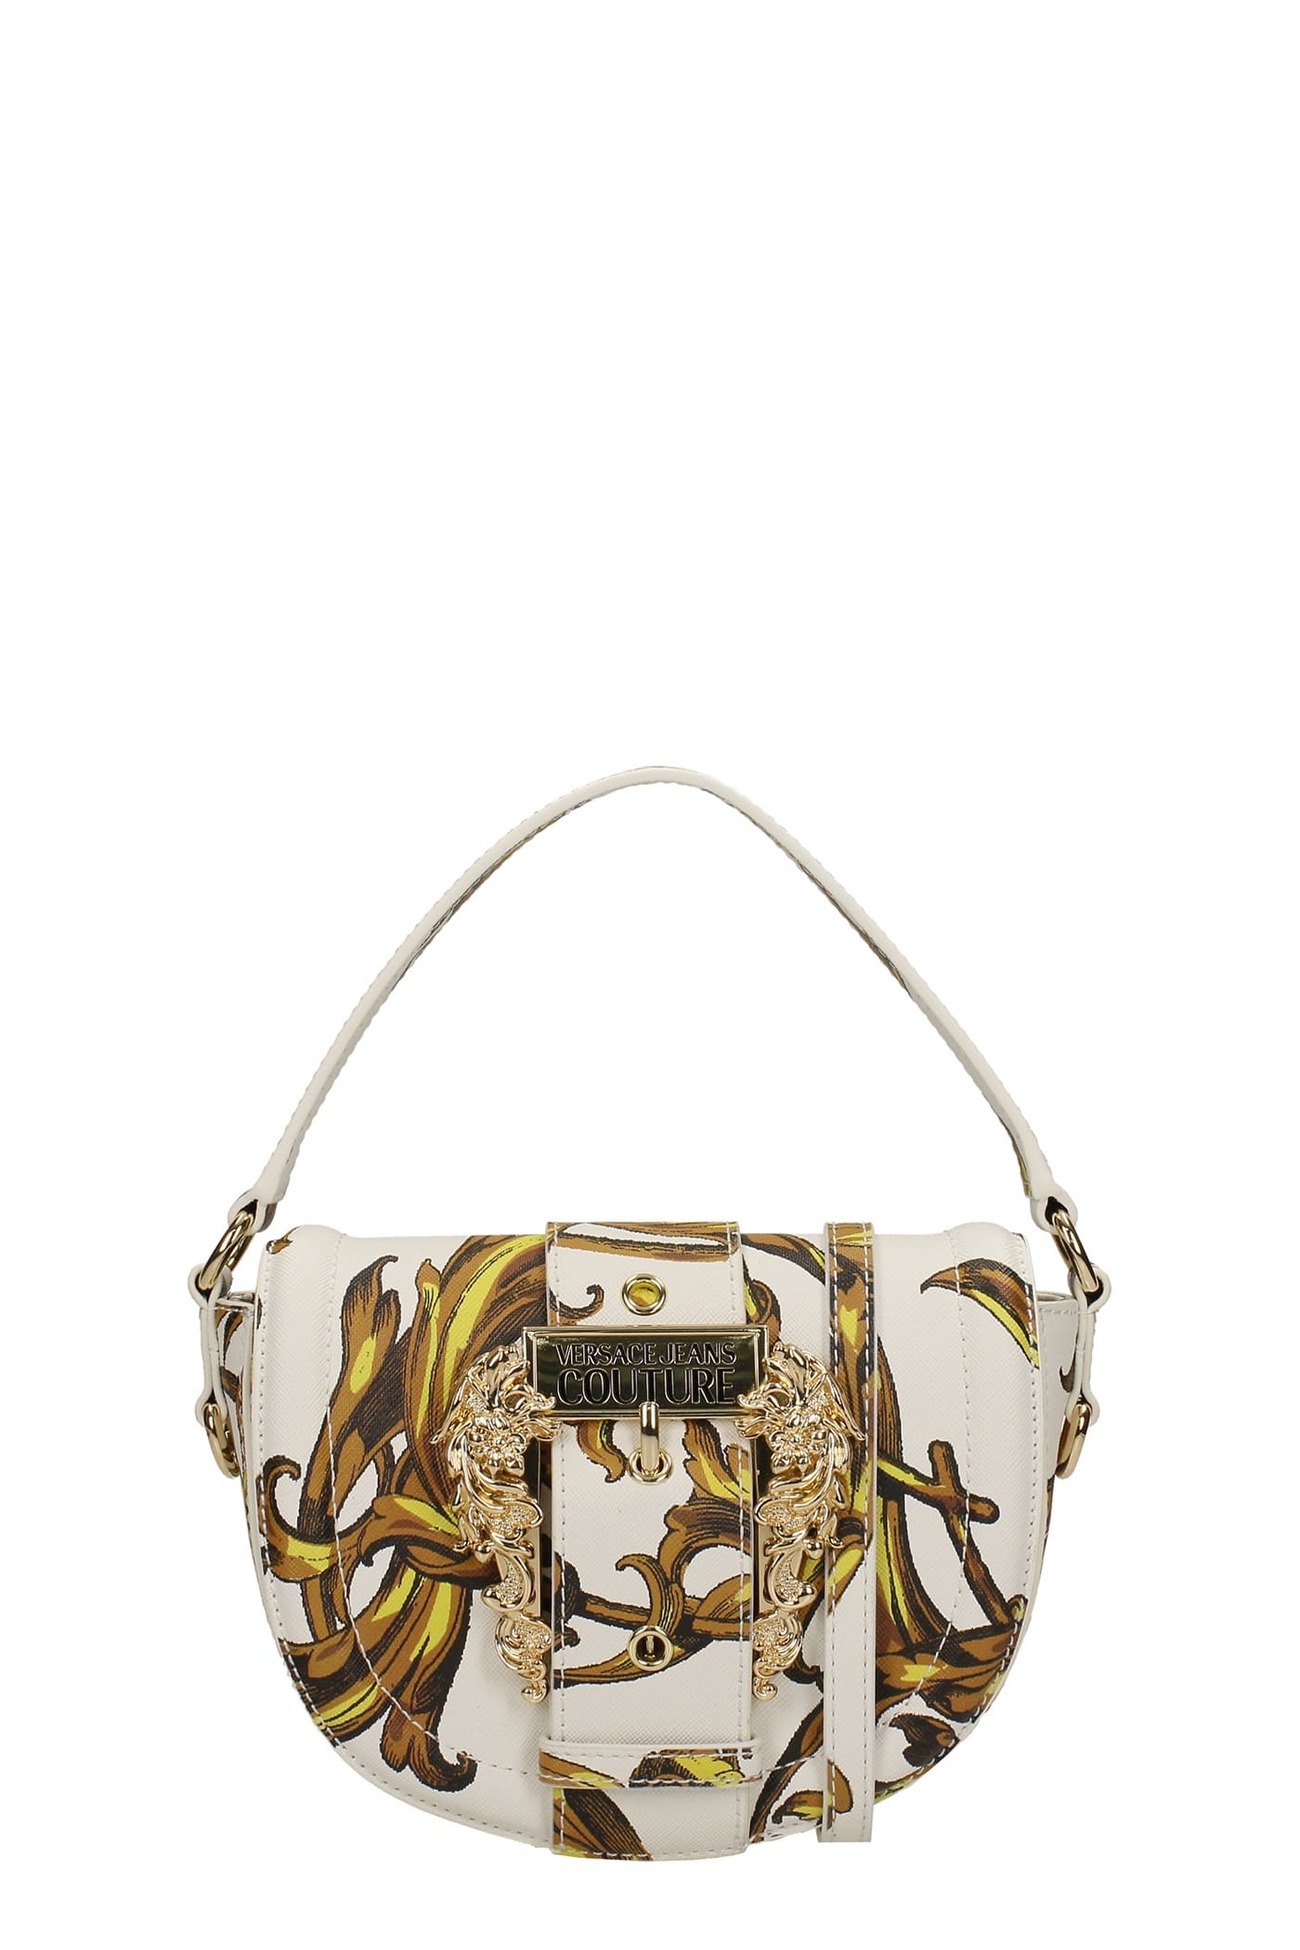 Versace Jeans Couture Hand Bag In White Faux Leather